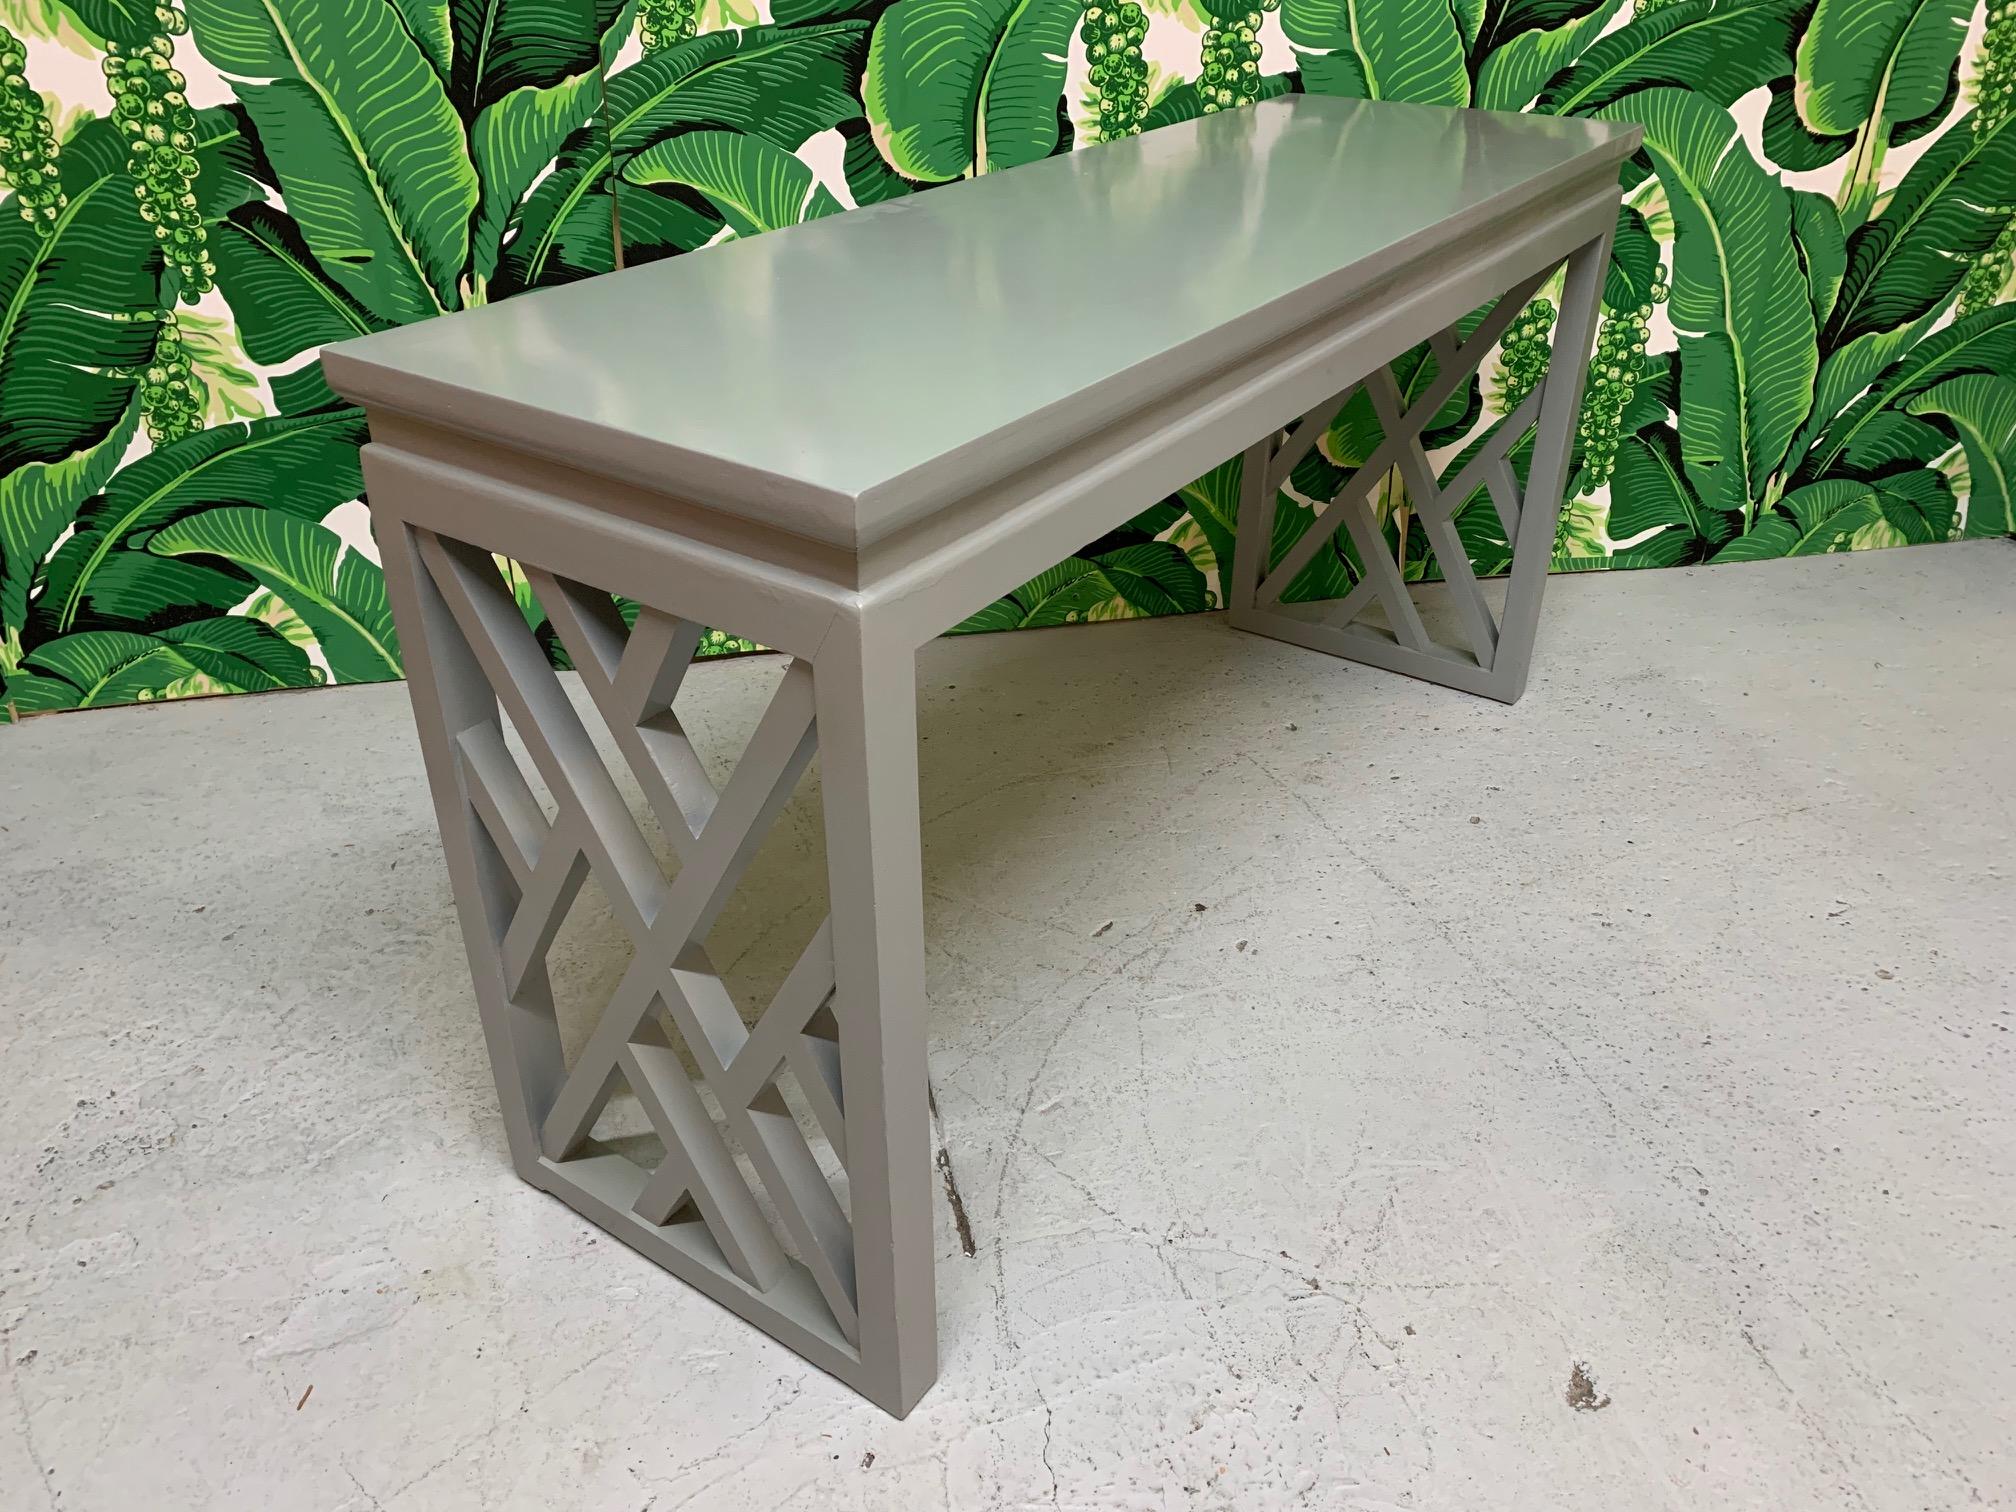 Chinese Chippendale detailing give this glossy gray lacquered console/sofa table the perfect touch of chinoiserie. Very good condition with only very minor imperfections consistent with age.